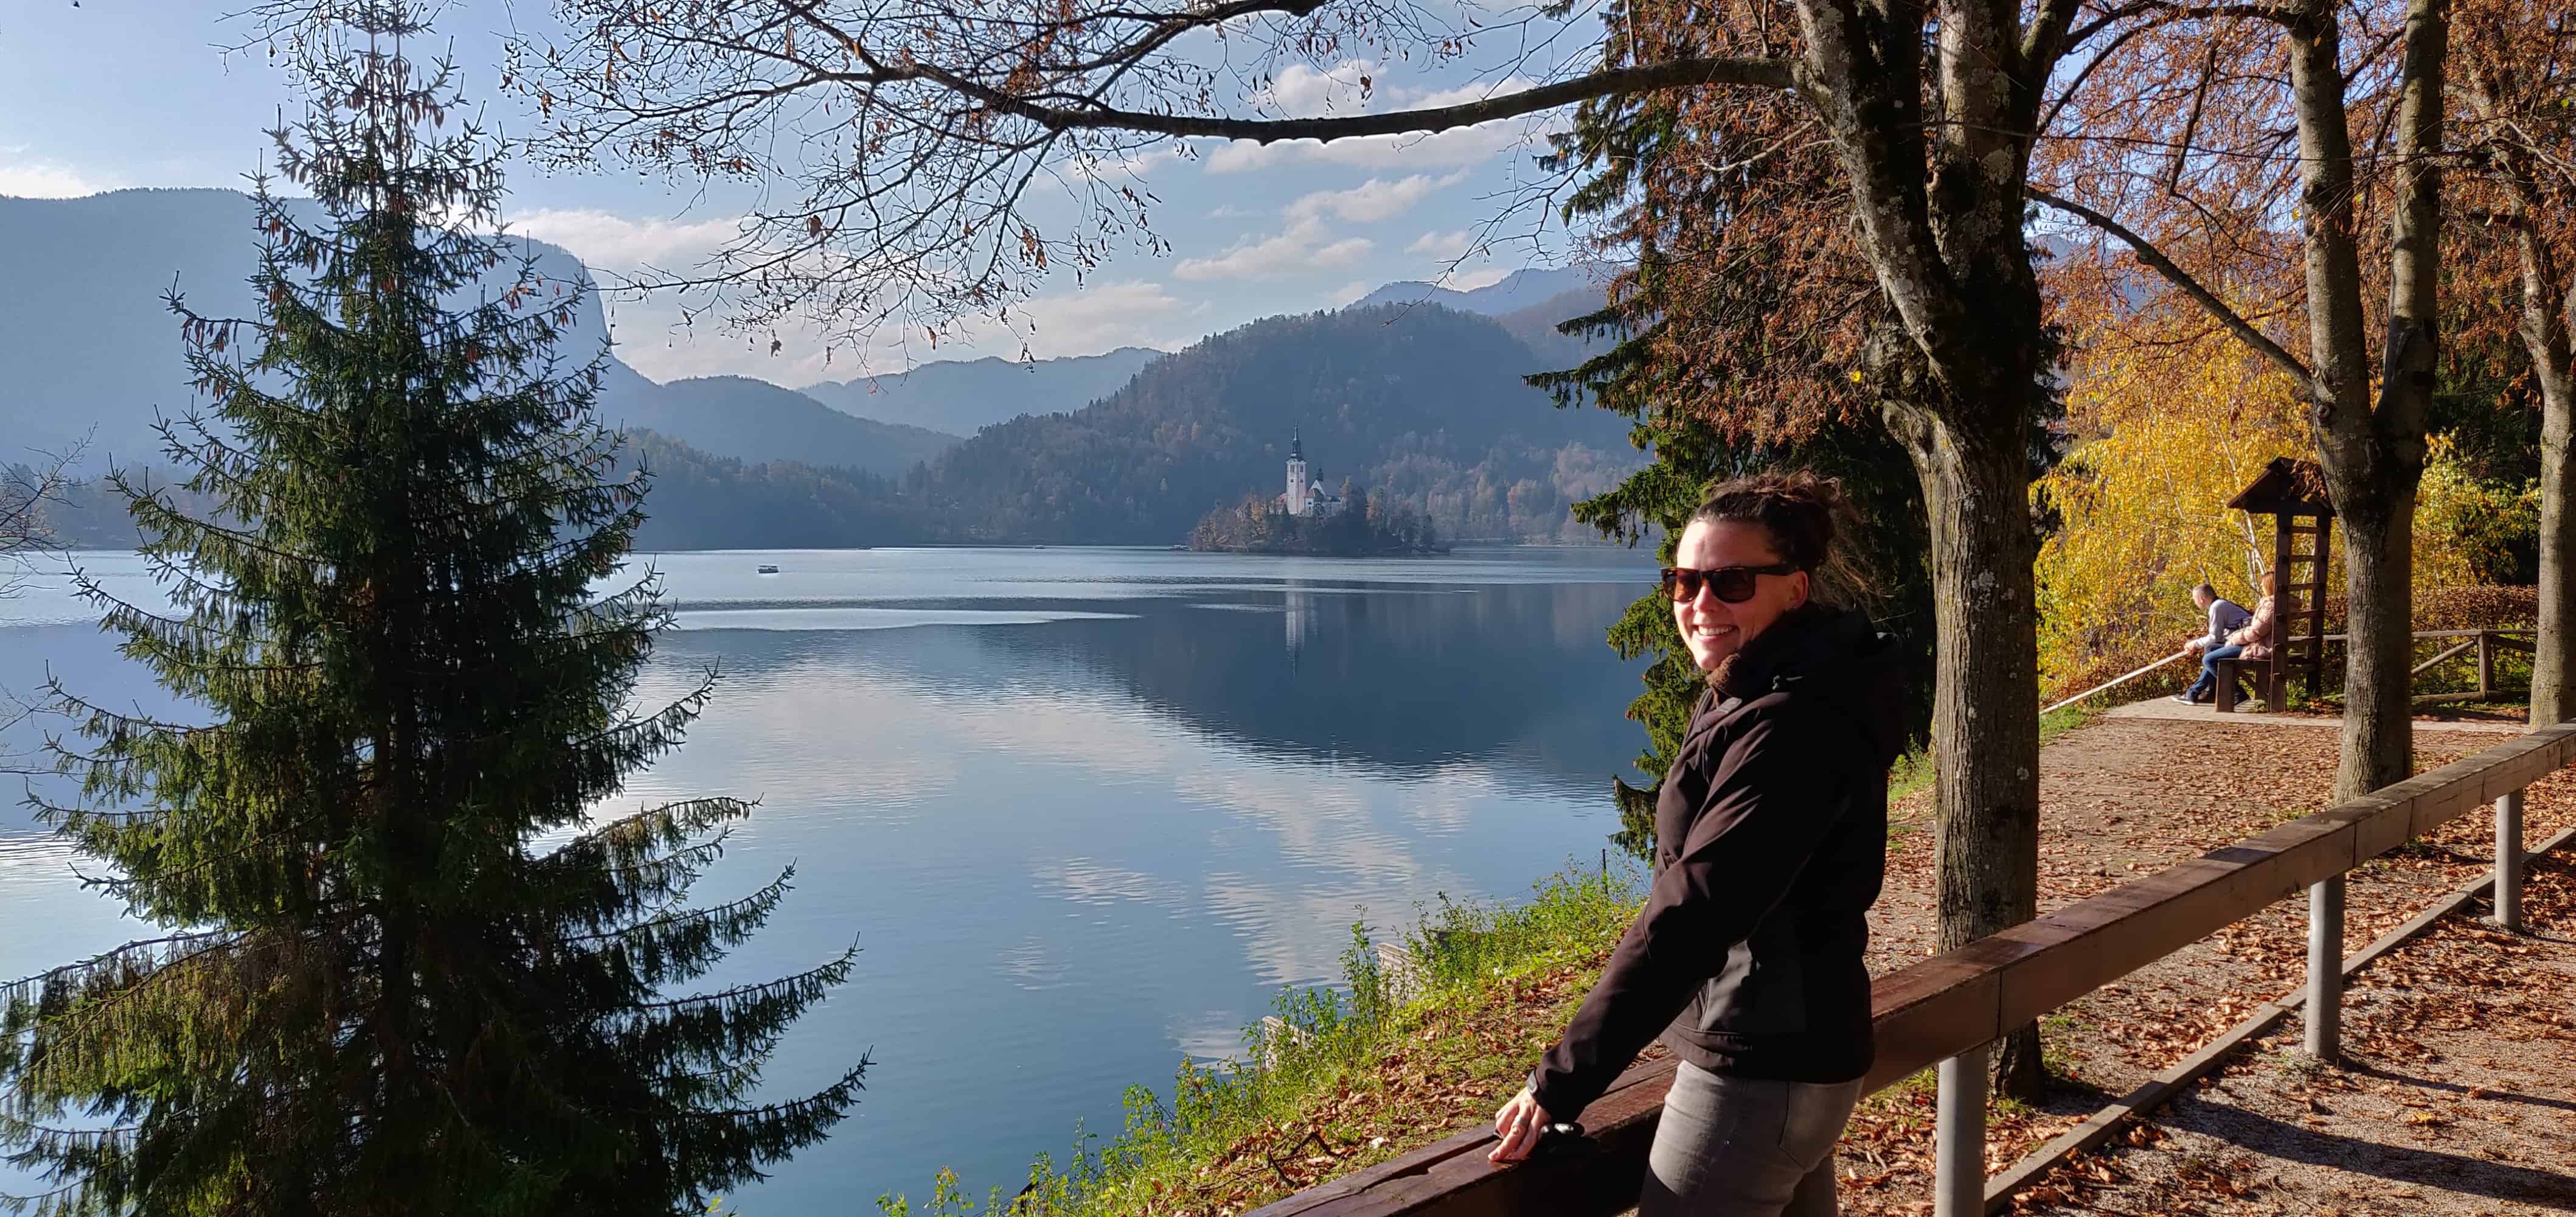 Me at lake Bled overlooking the church